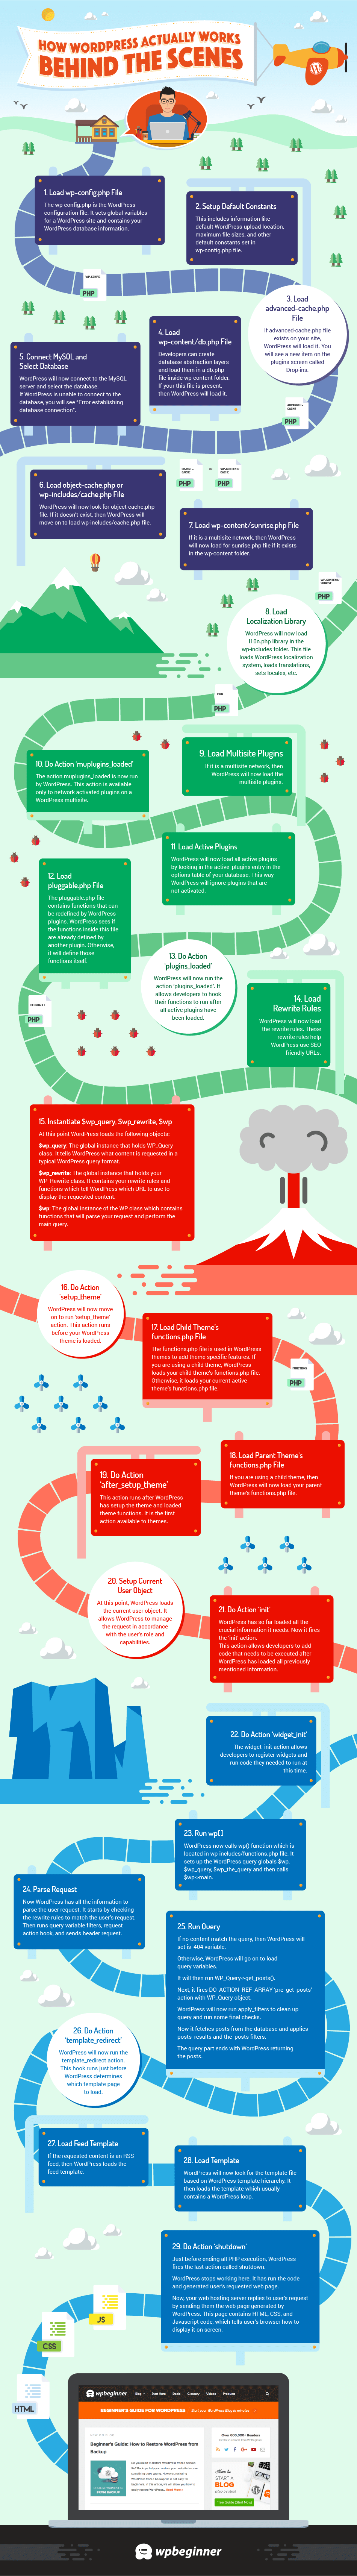 How WordPress Actually Works Behind the Scenes - Infographic